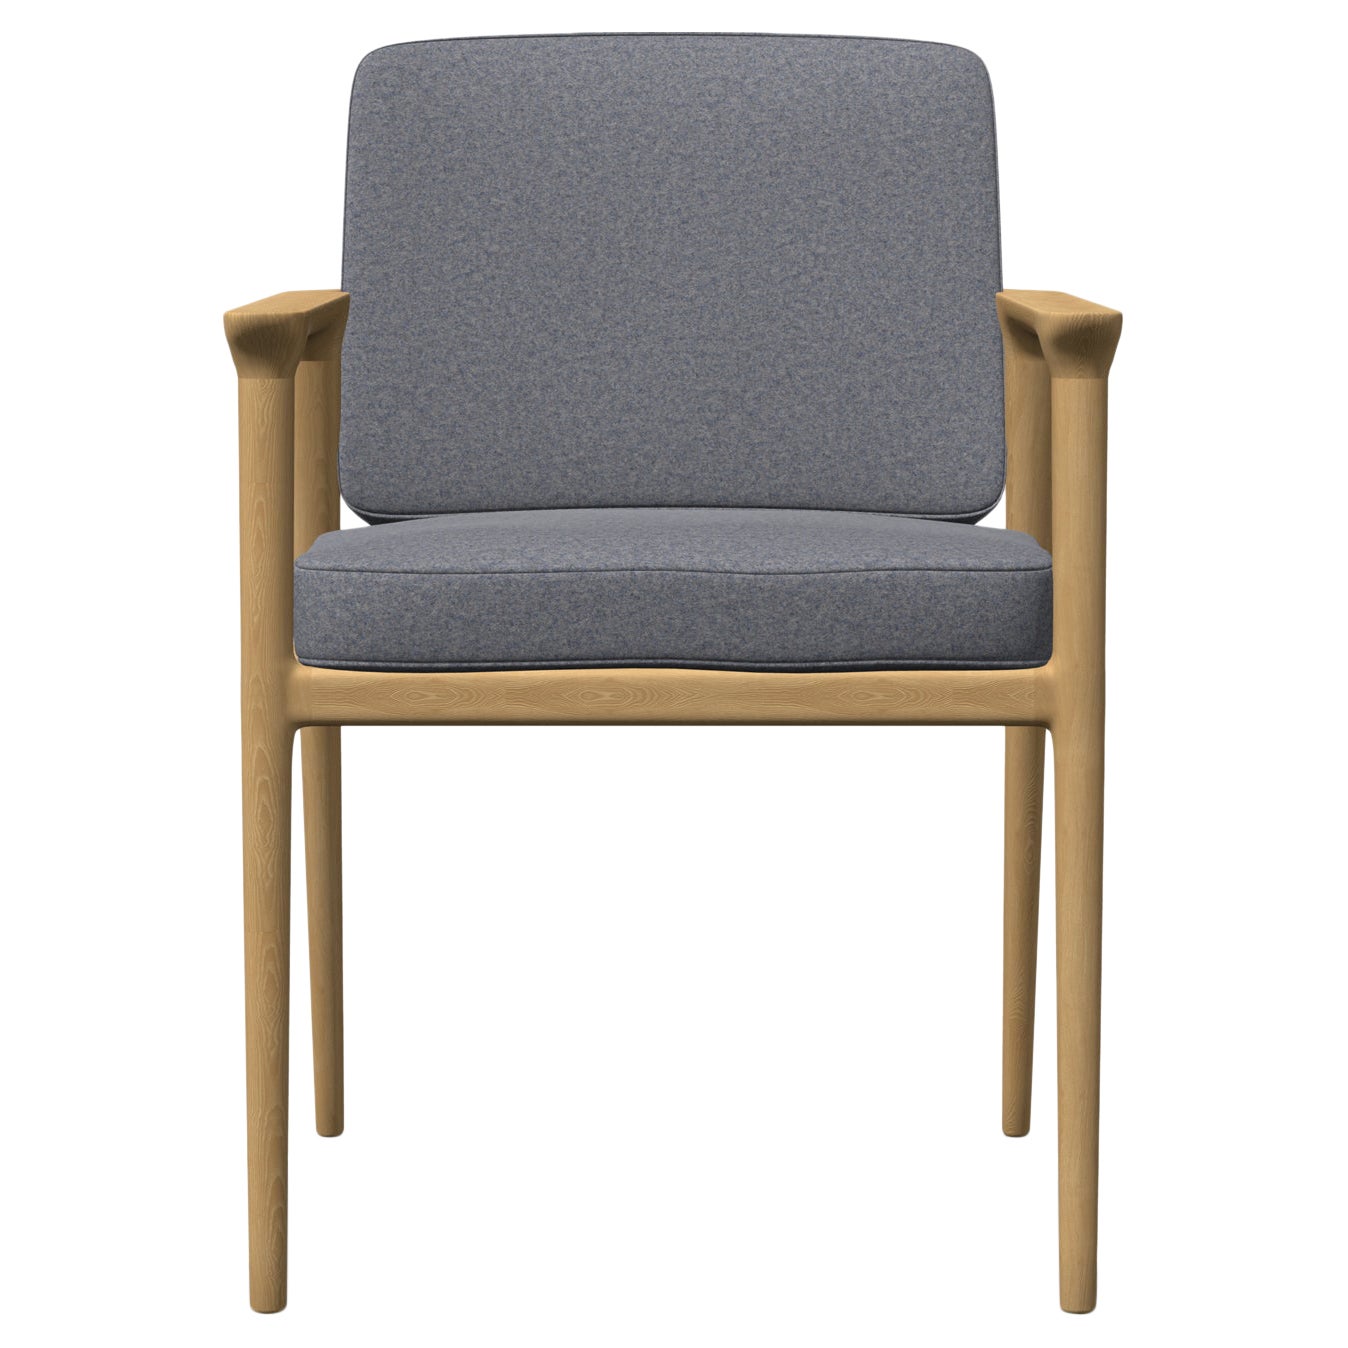 Moooi Zio Dining Chair in Divina MD, 733 Upholstery with Oak Natural Oil Frame